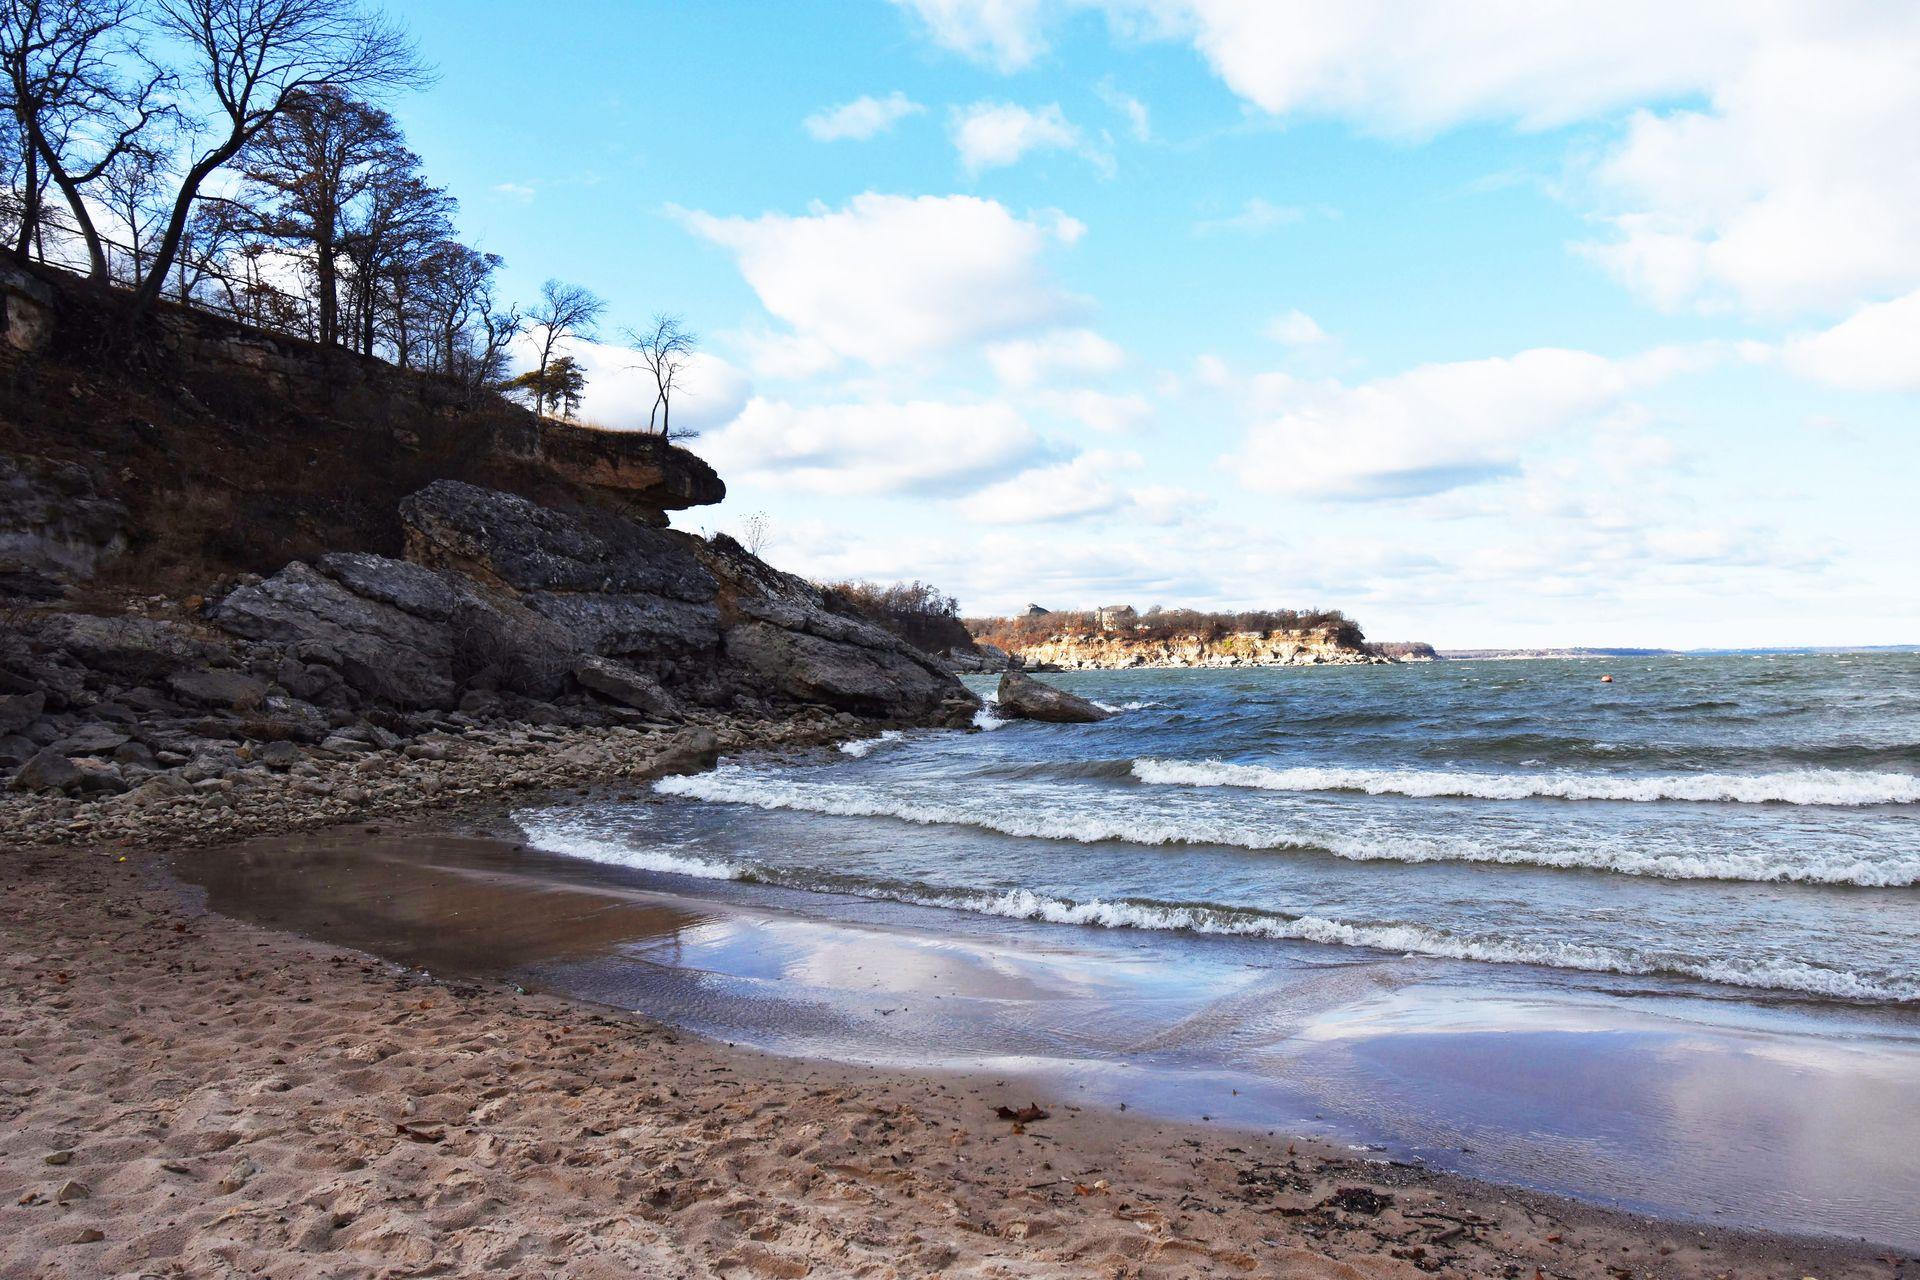 Standing on a beach with a cliff rising up at Eisenhower State Park.